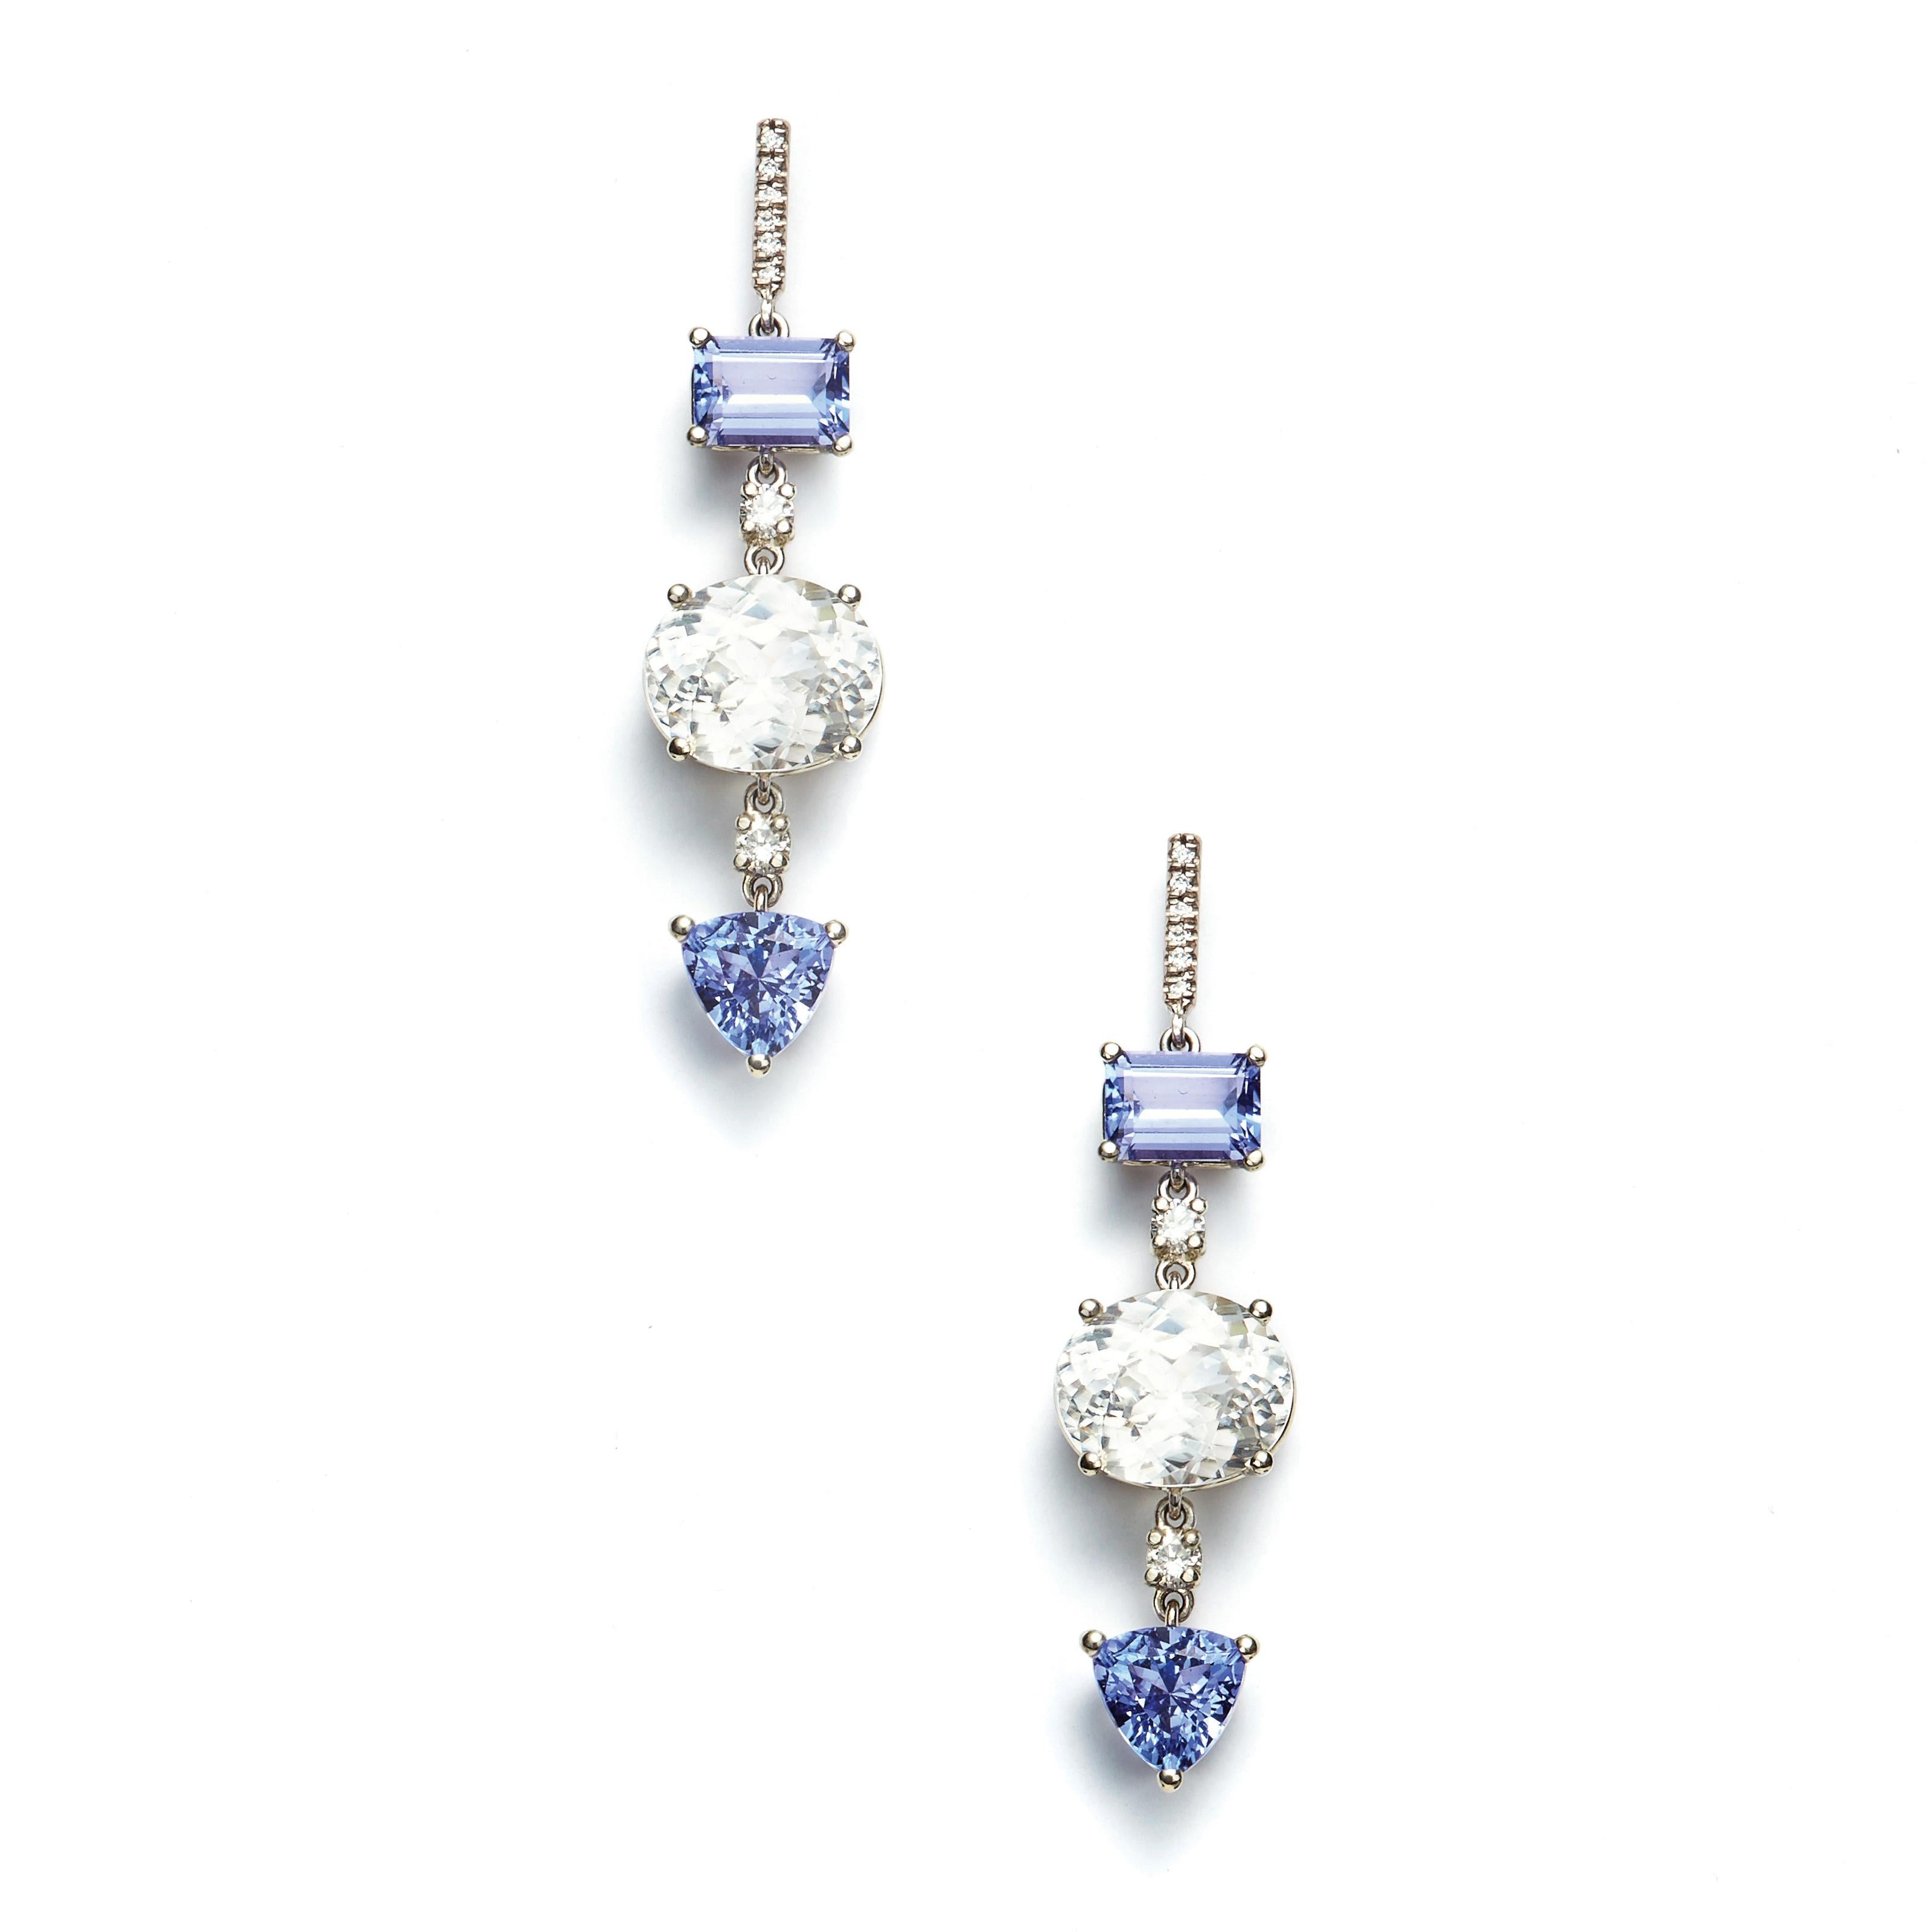 The beautiful hue of Tanzanite, set in 18 Karat White Gold, stands out in these 2.22 Carat stones and is amplified by the sparkle of White Zircons* and Diamonds. Truly an exceptional piece of jewelry.

Diamonds: 2.4 Carat
White Zircon*: 10.37